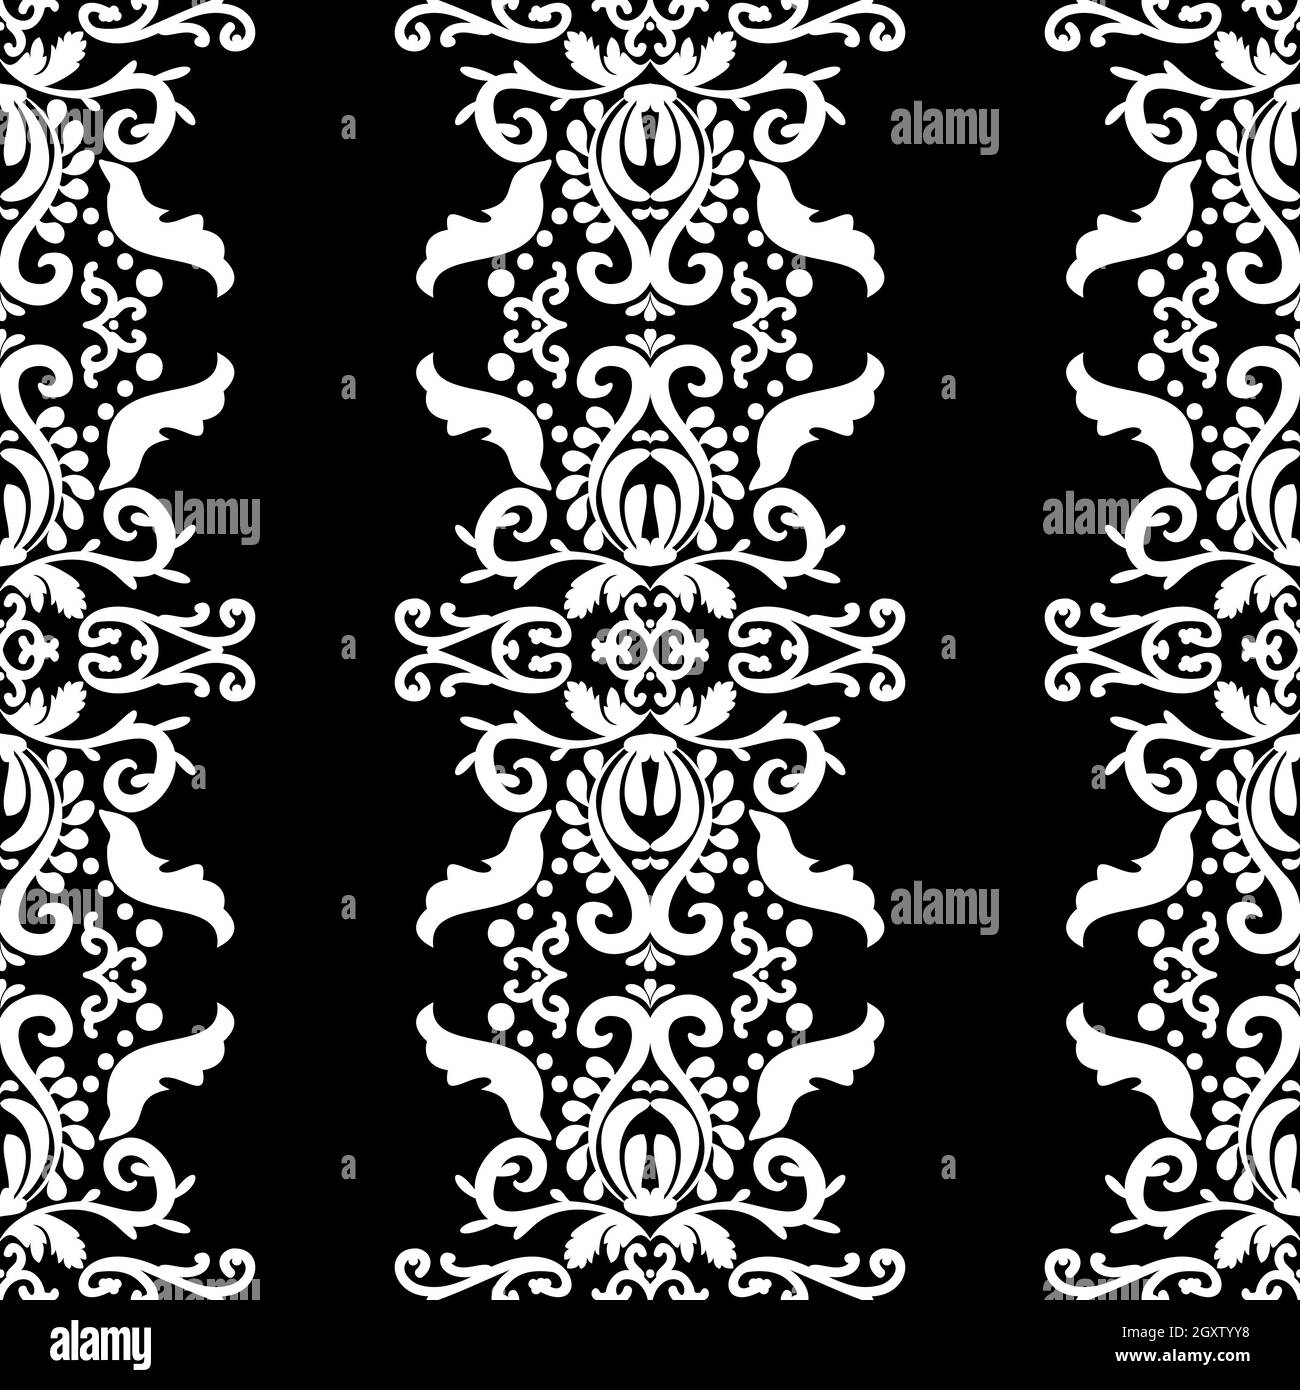 Ornate white pattern on a black background. Seamless pattern, vertical damask ornament. Lace pattern. Black and white color. Vector graphic vintage Stock Vector